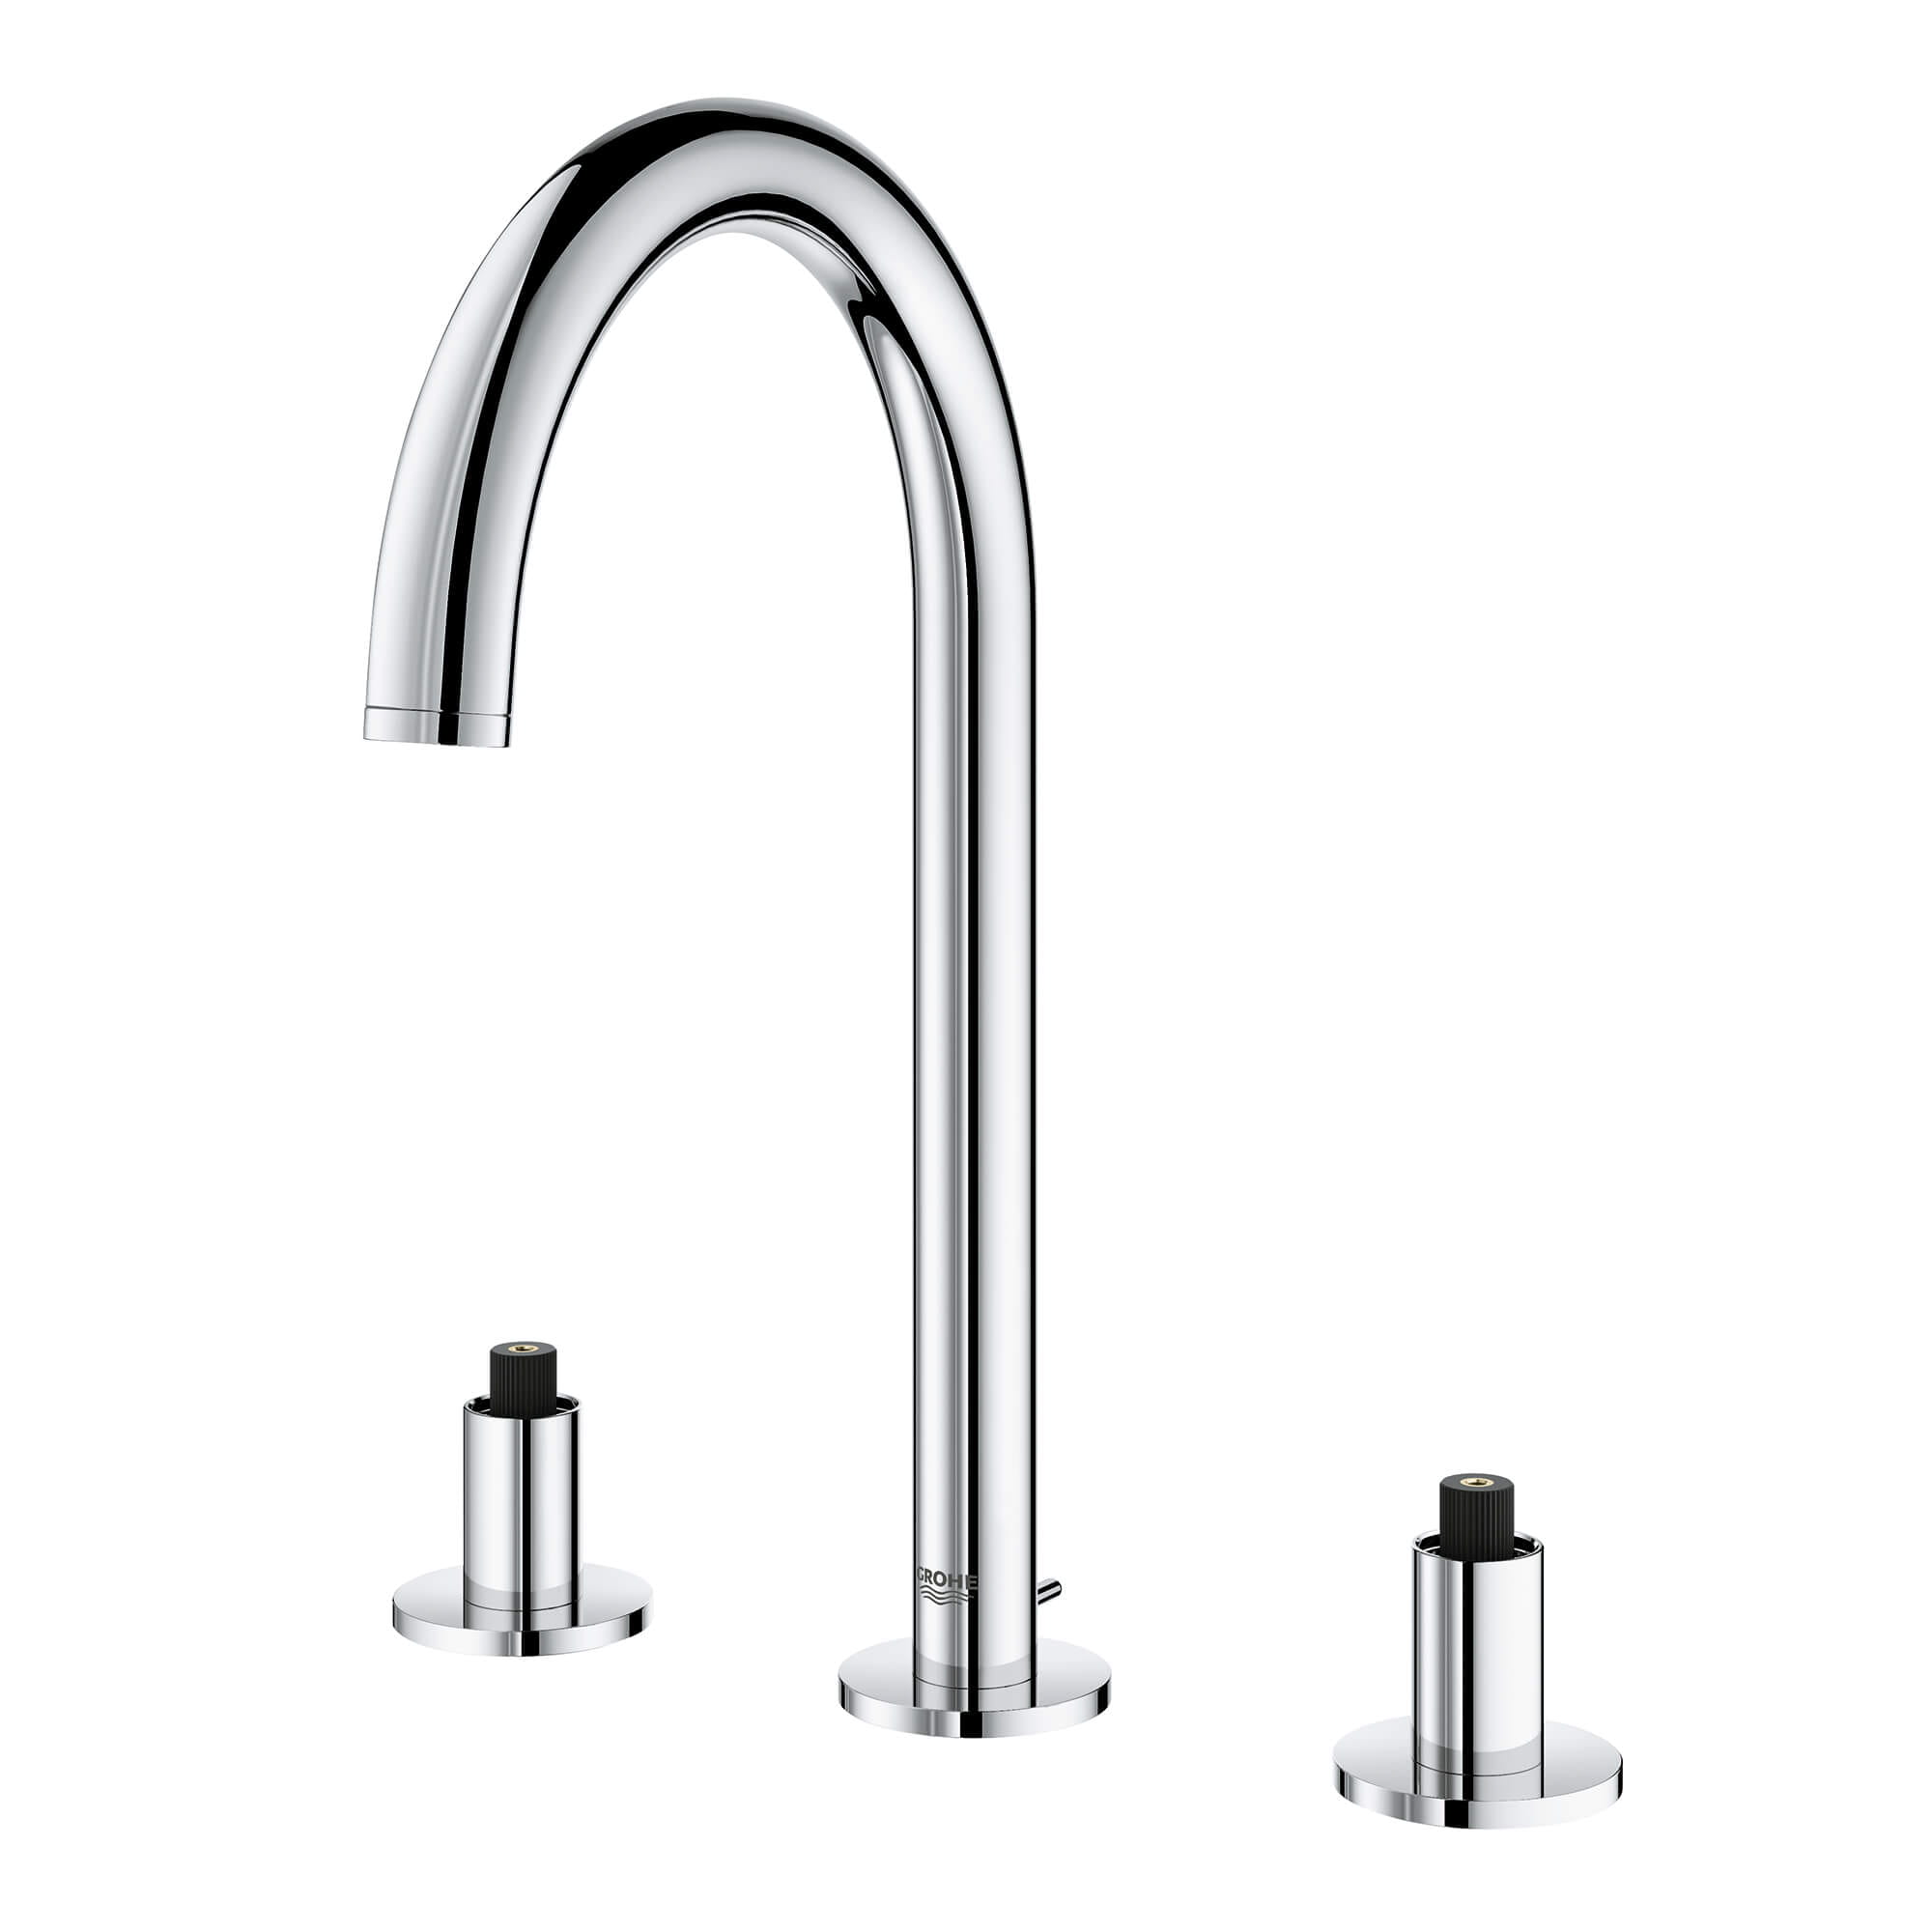 8-INCH WIDESPREAD 2-HANDLE M-SIZE BATHROOM FAUCET 1.2 GPM-product-view